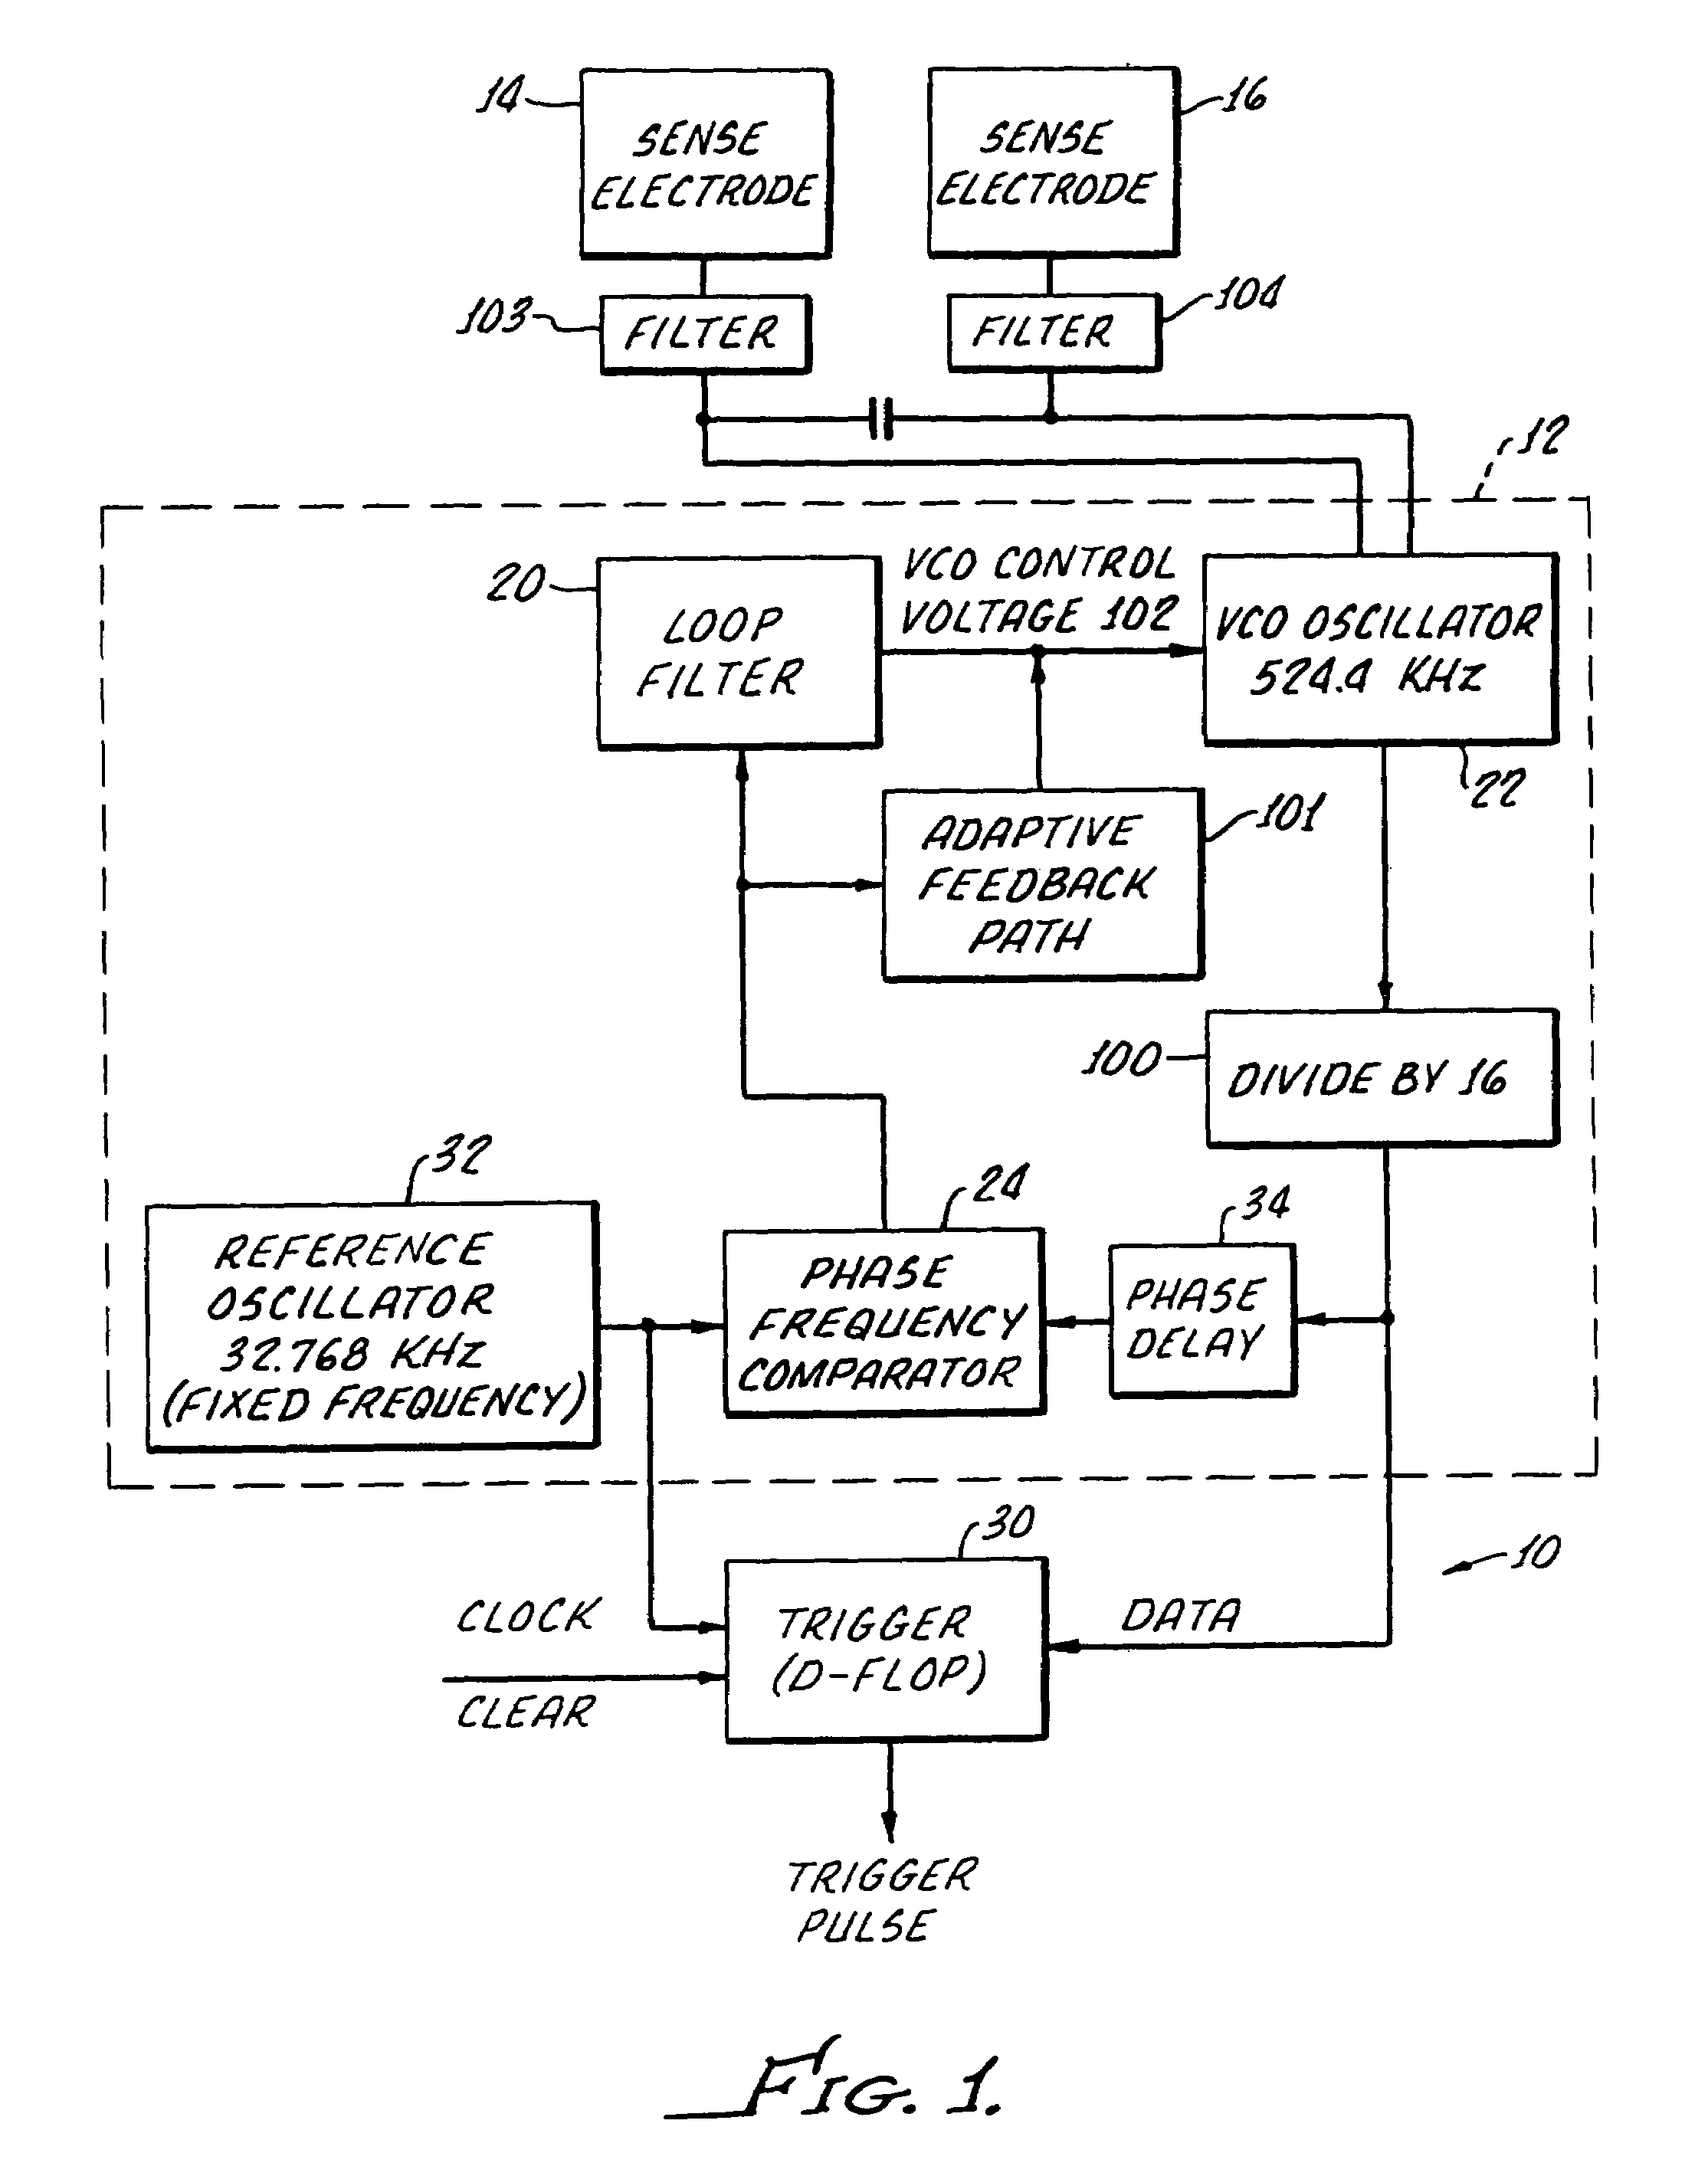 Control system with capacitive detector